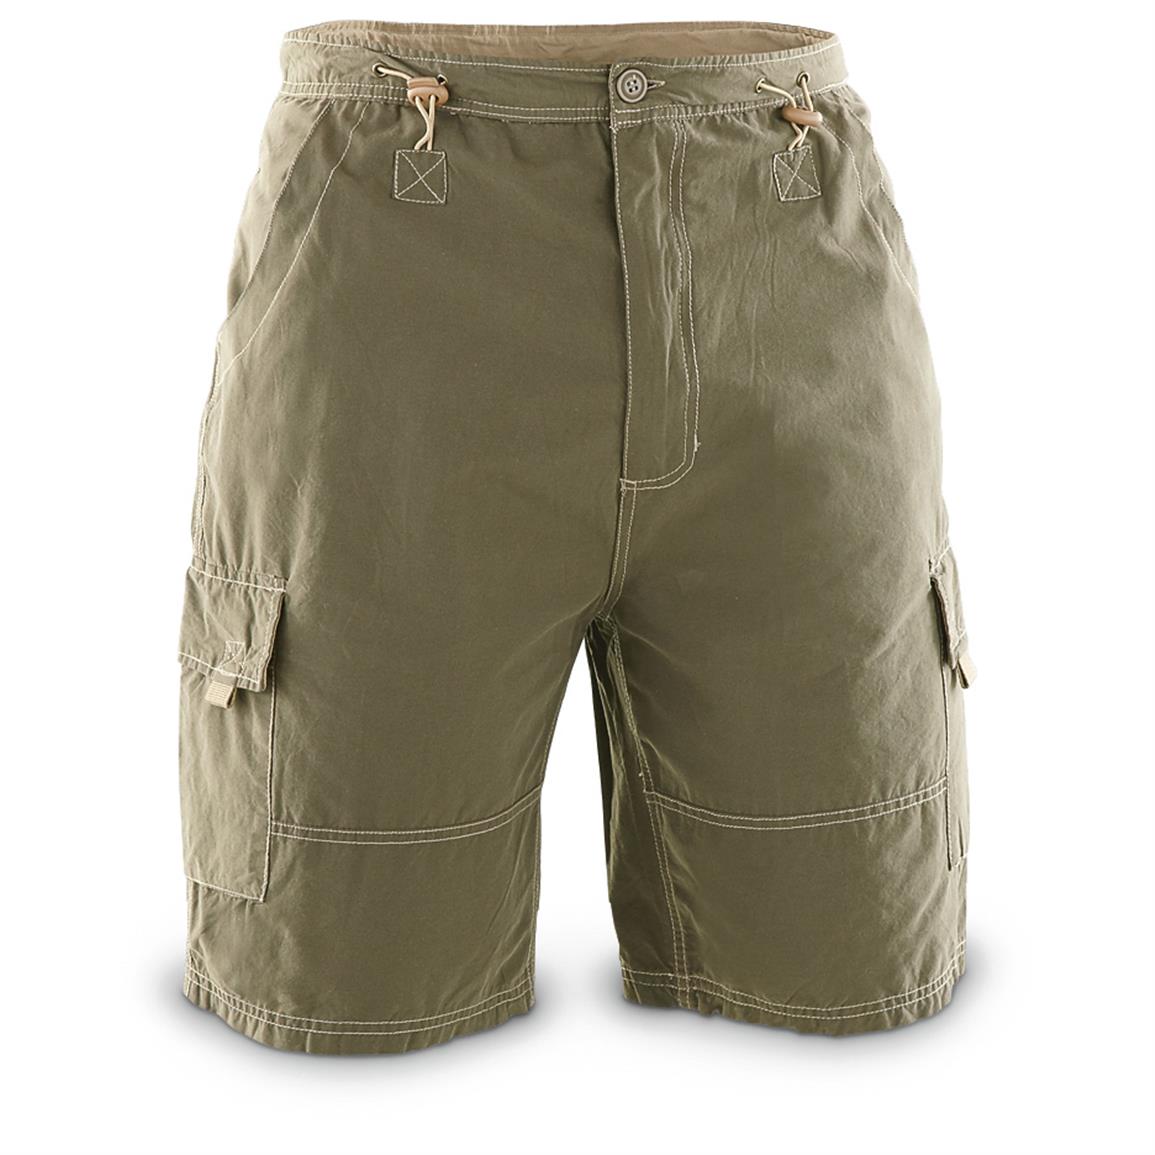 Suisse Sport Ripstop Shorts - 627193, Shorts at Sportsman's Guide